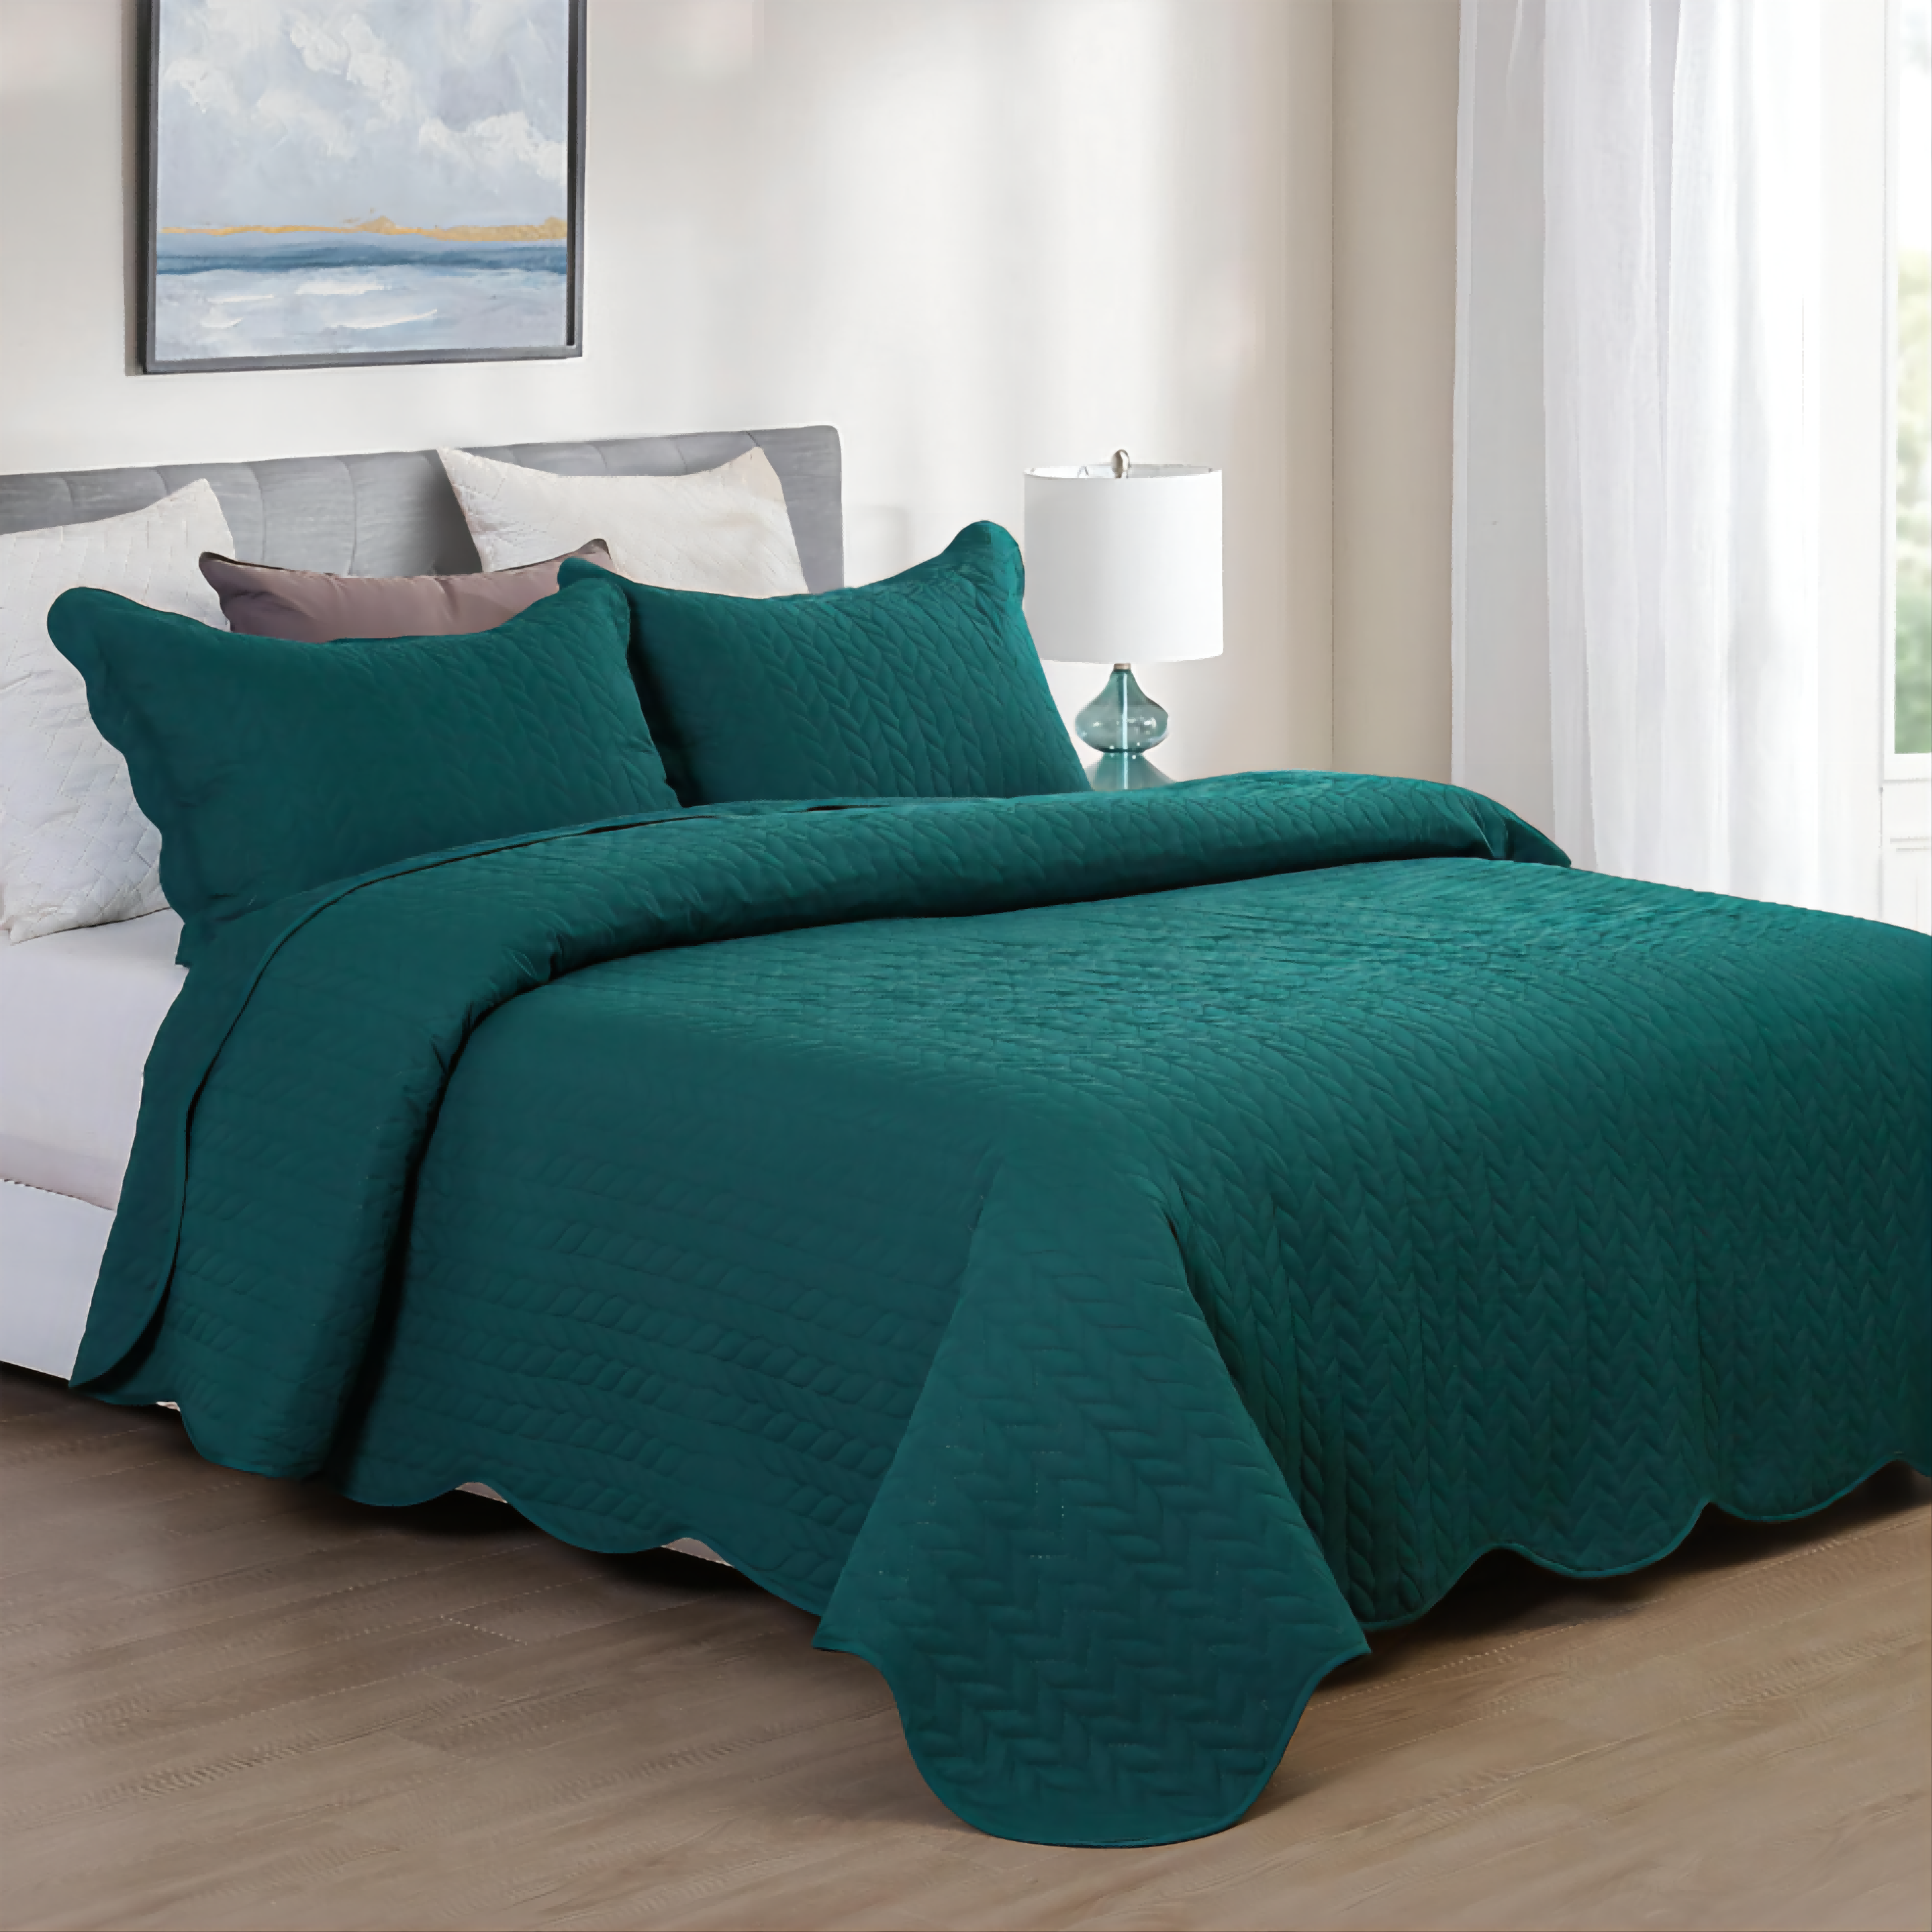 China wholesale Goose Down Feathers Factory –  All Season Quilt Set 3 Piece Bedspread Coverlet Set Emerald Green – HANYUN